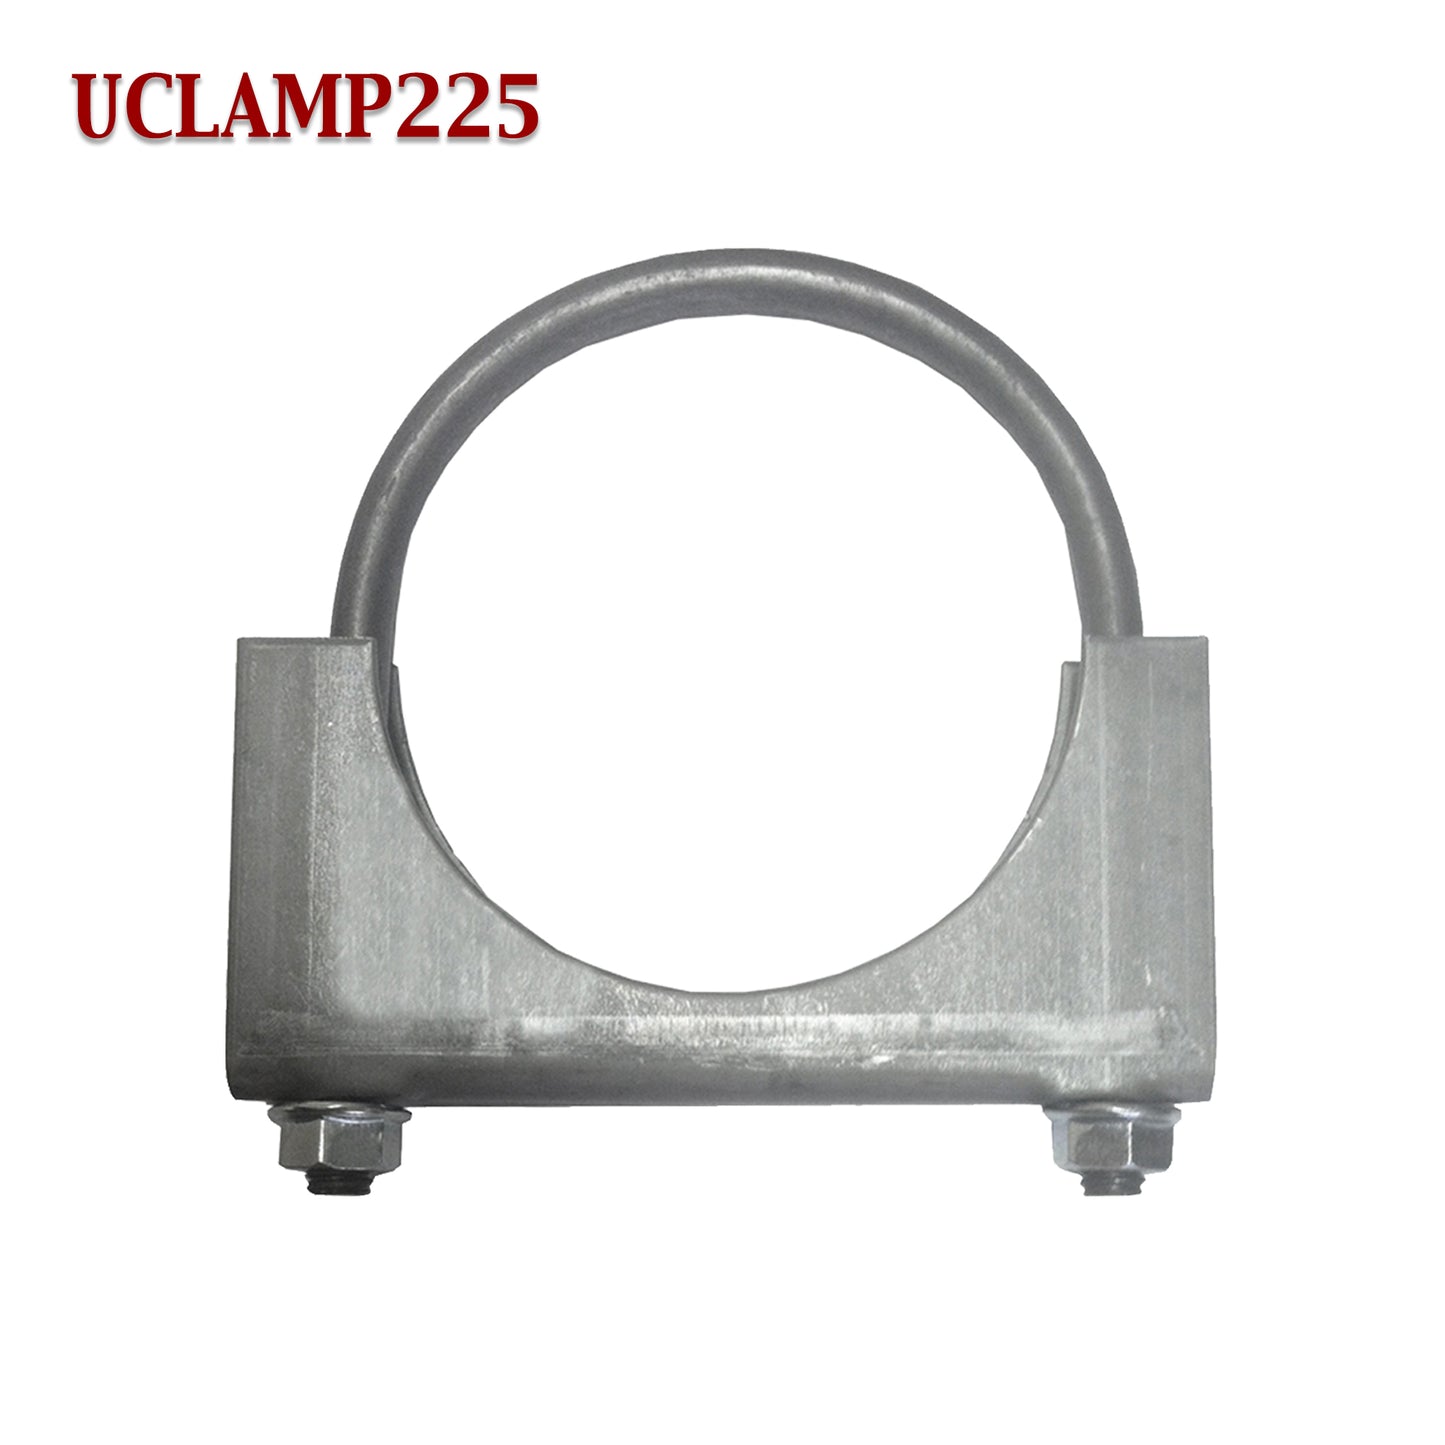 2 1/4" Exhaust Muffler Clamp U-Bolt Saddle Style For 2.25" Pipe 5/16" Rod